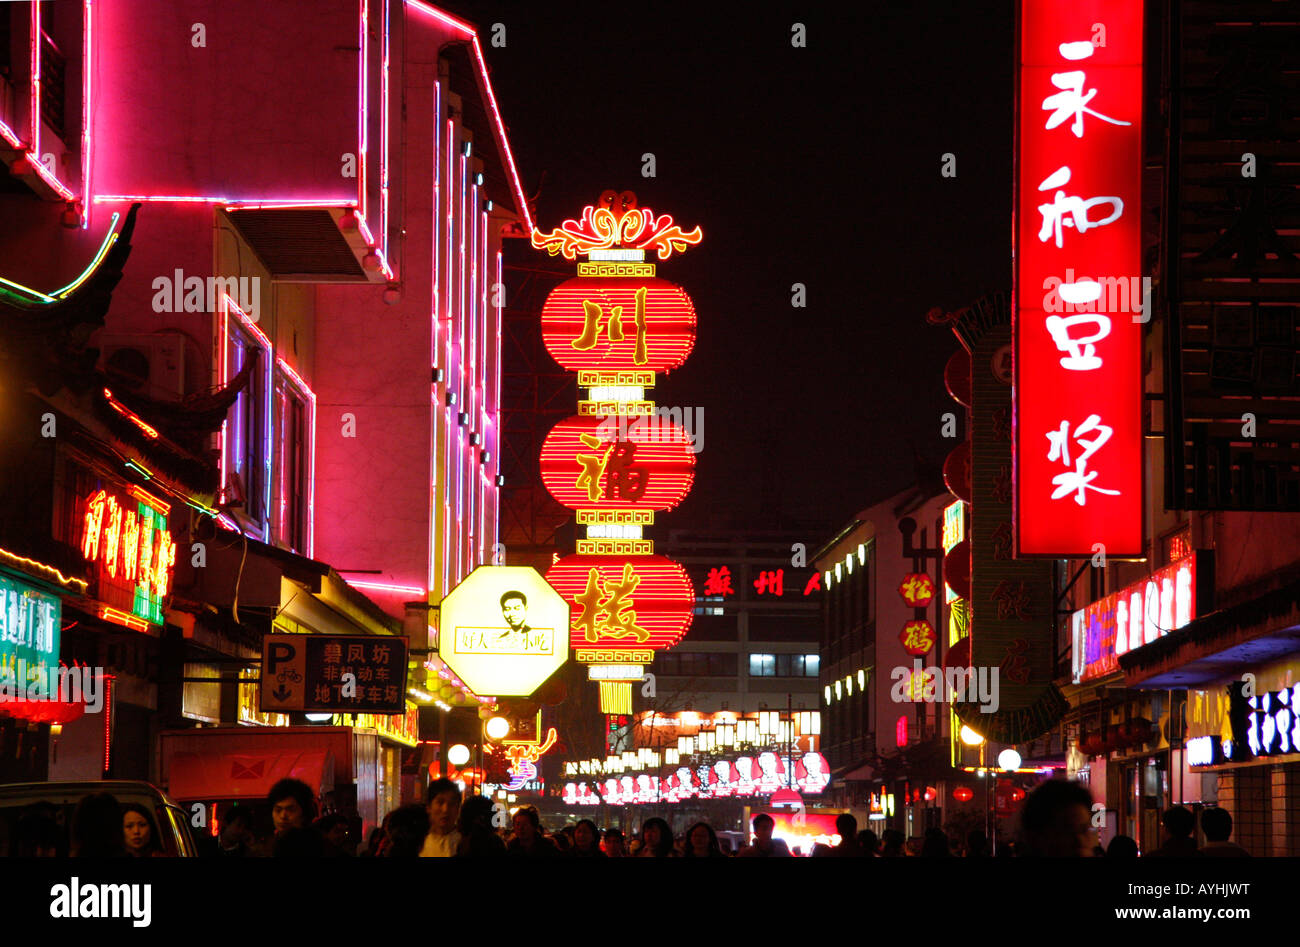 NEON NIGHT LIGHTS IN DOWNTOWN MODERN SUZHOU DECORATE SHOPS RESTAURANTS AND LEISURE FACILITIES ALONG THE MAIN CANAL Stock Photo